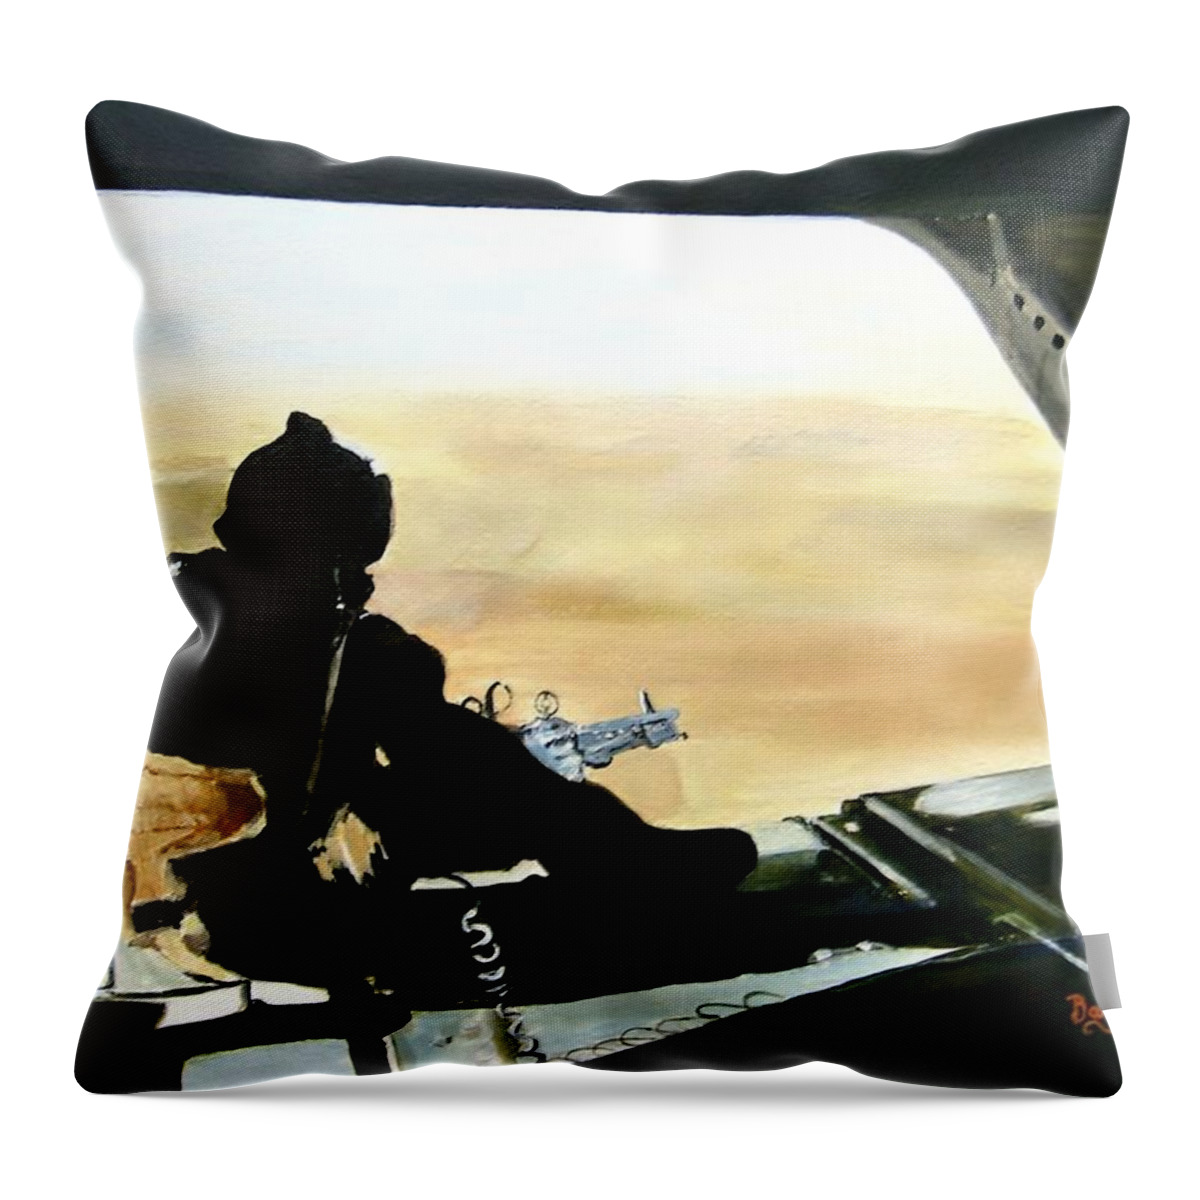 Afghanistan Throw Pillow featuring the painting Tail Gunner Helmland by Barry BLAKE